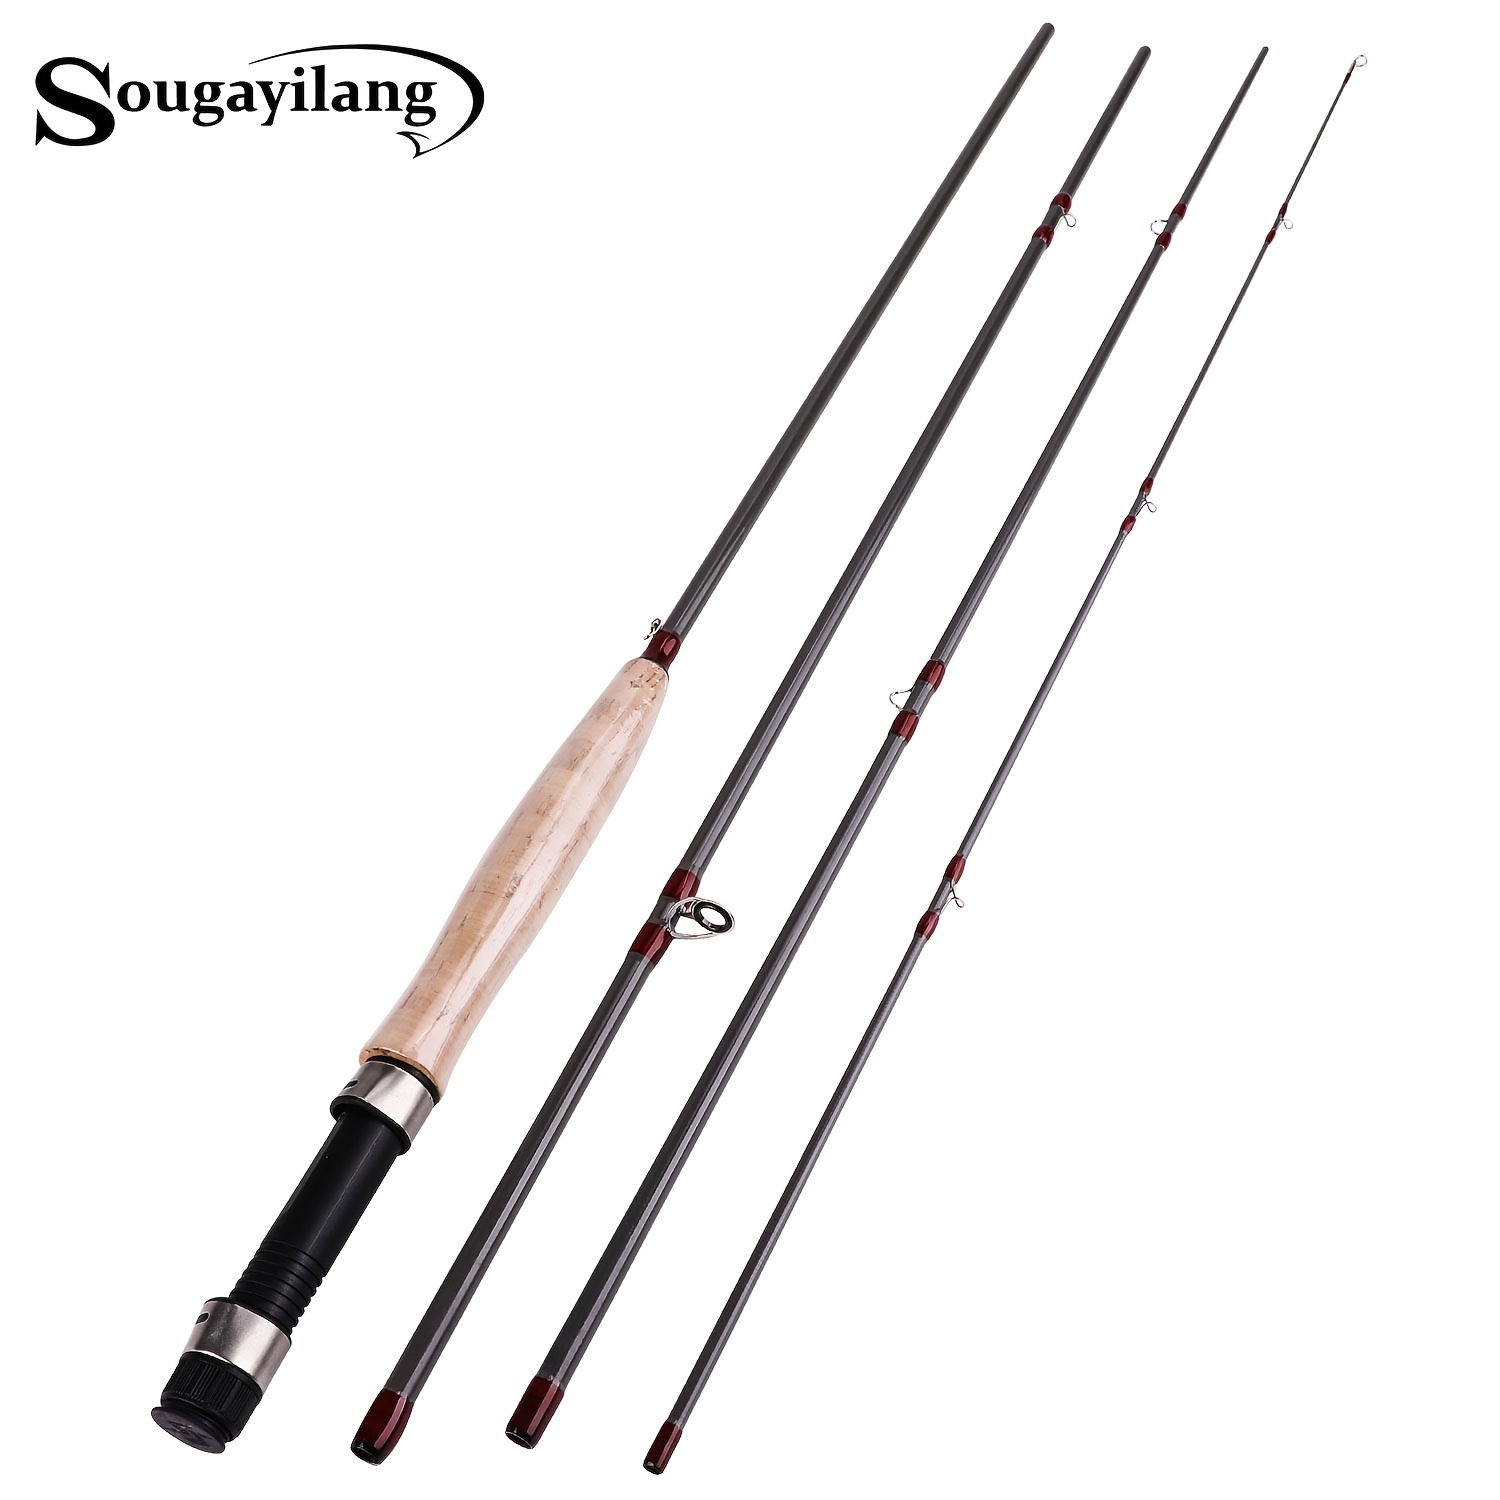 Maximumcatch Portable 8 Section Travel Fly Fishing Rod 2.7m Carbon